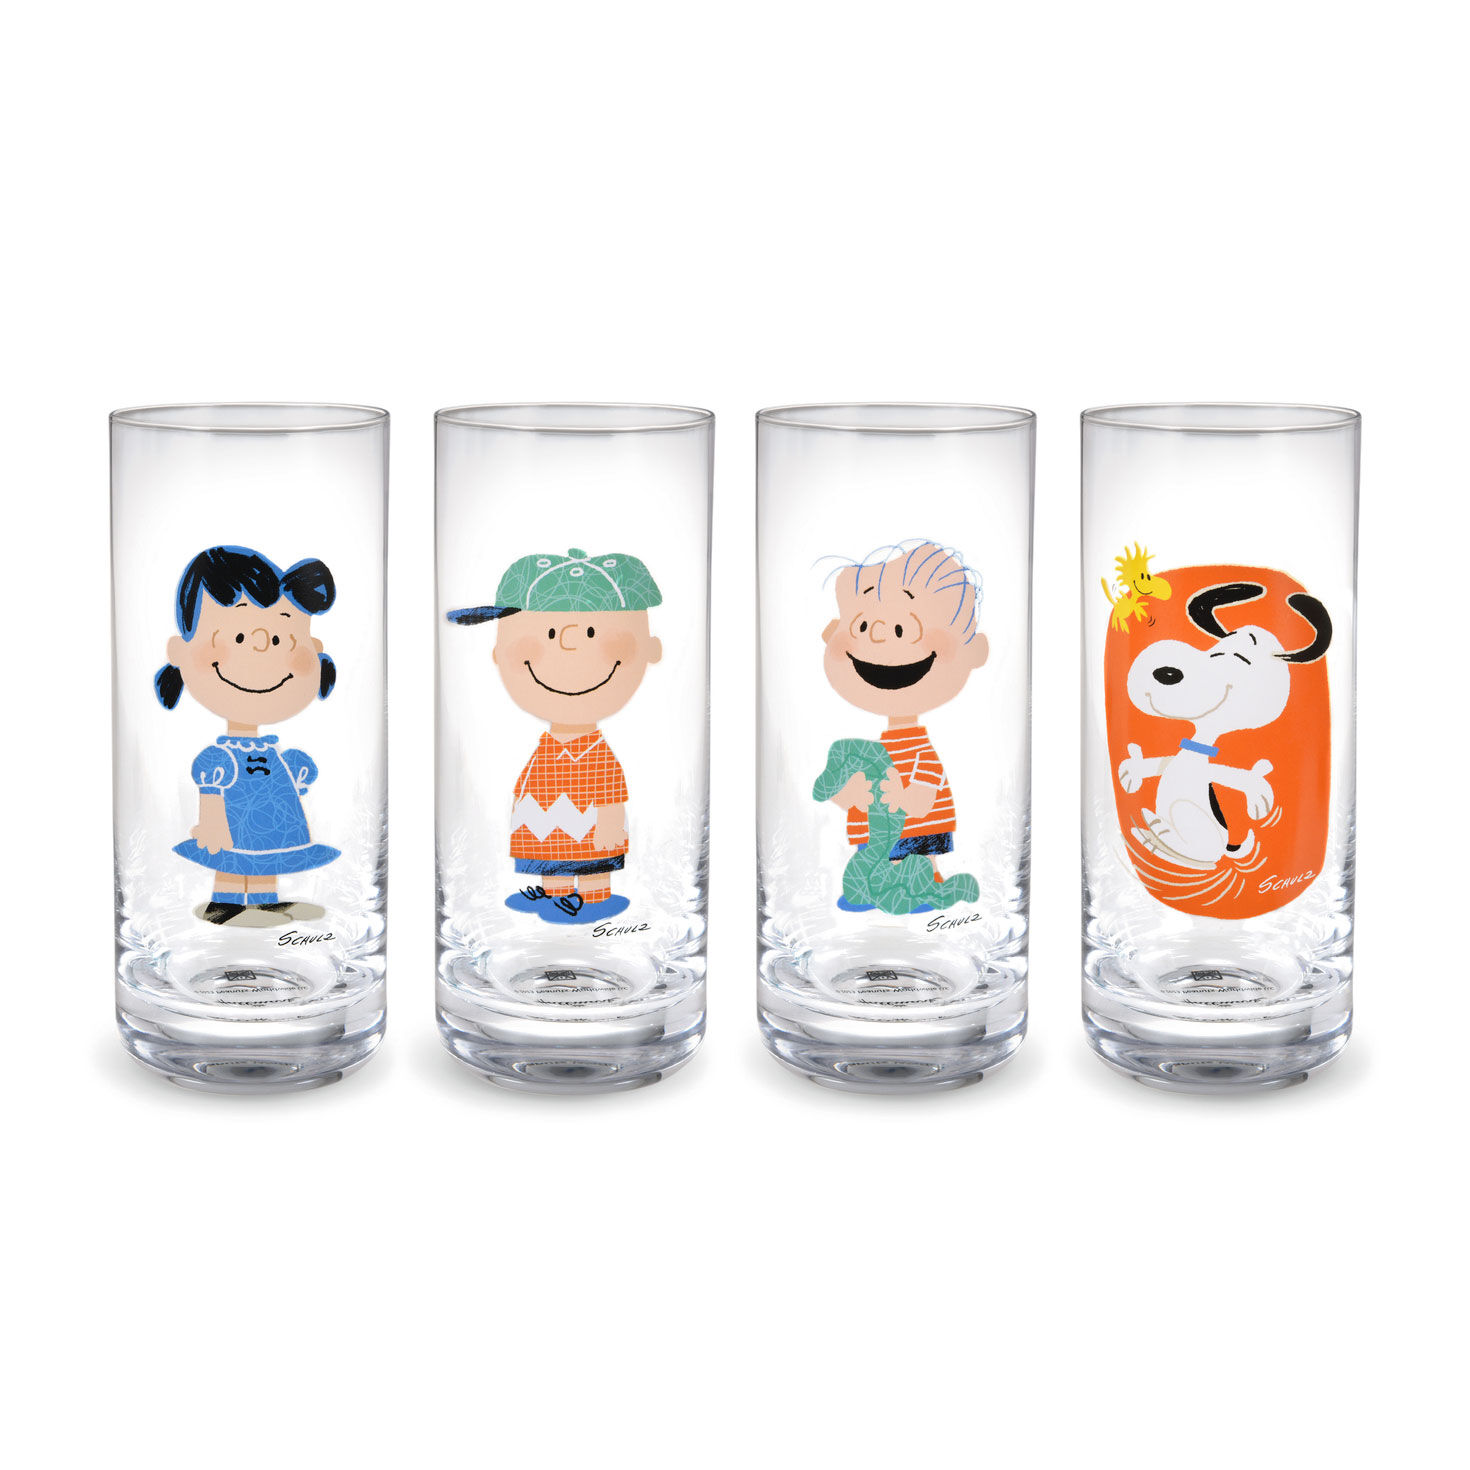 Snoopy Wine Glass, Custom Snoopy Cup, Personalized Snoopy Drinkware 